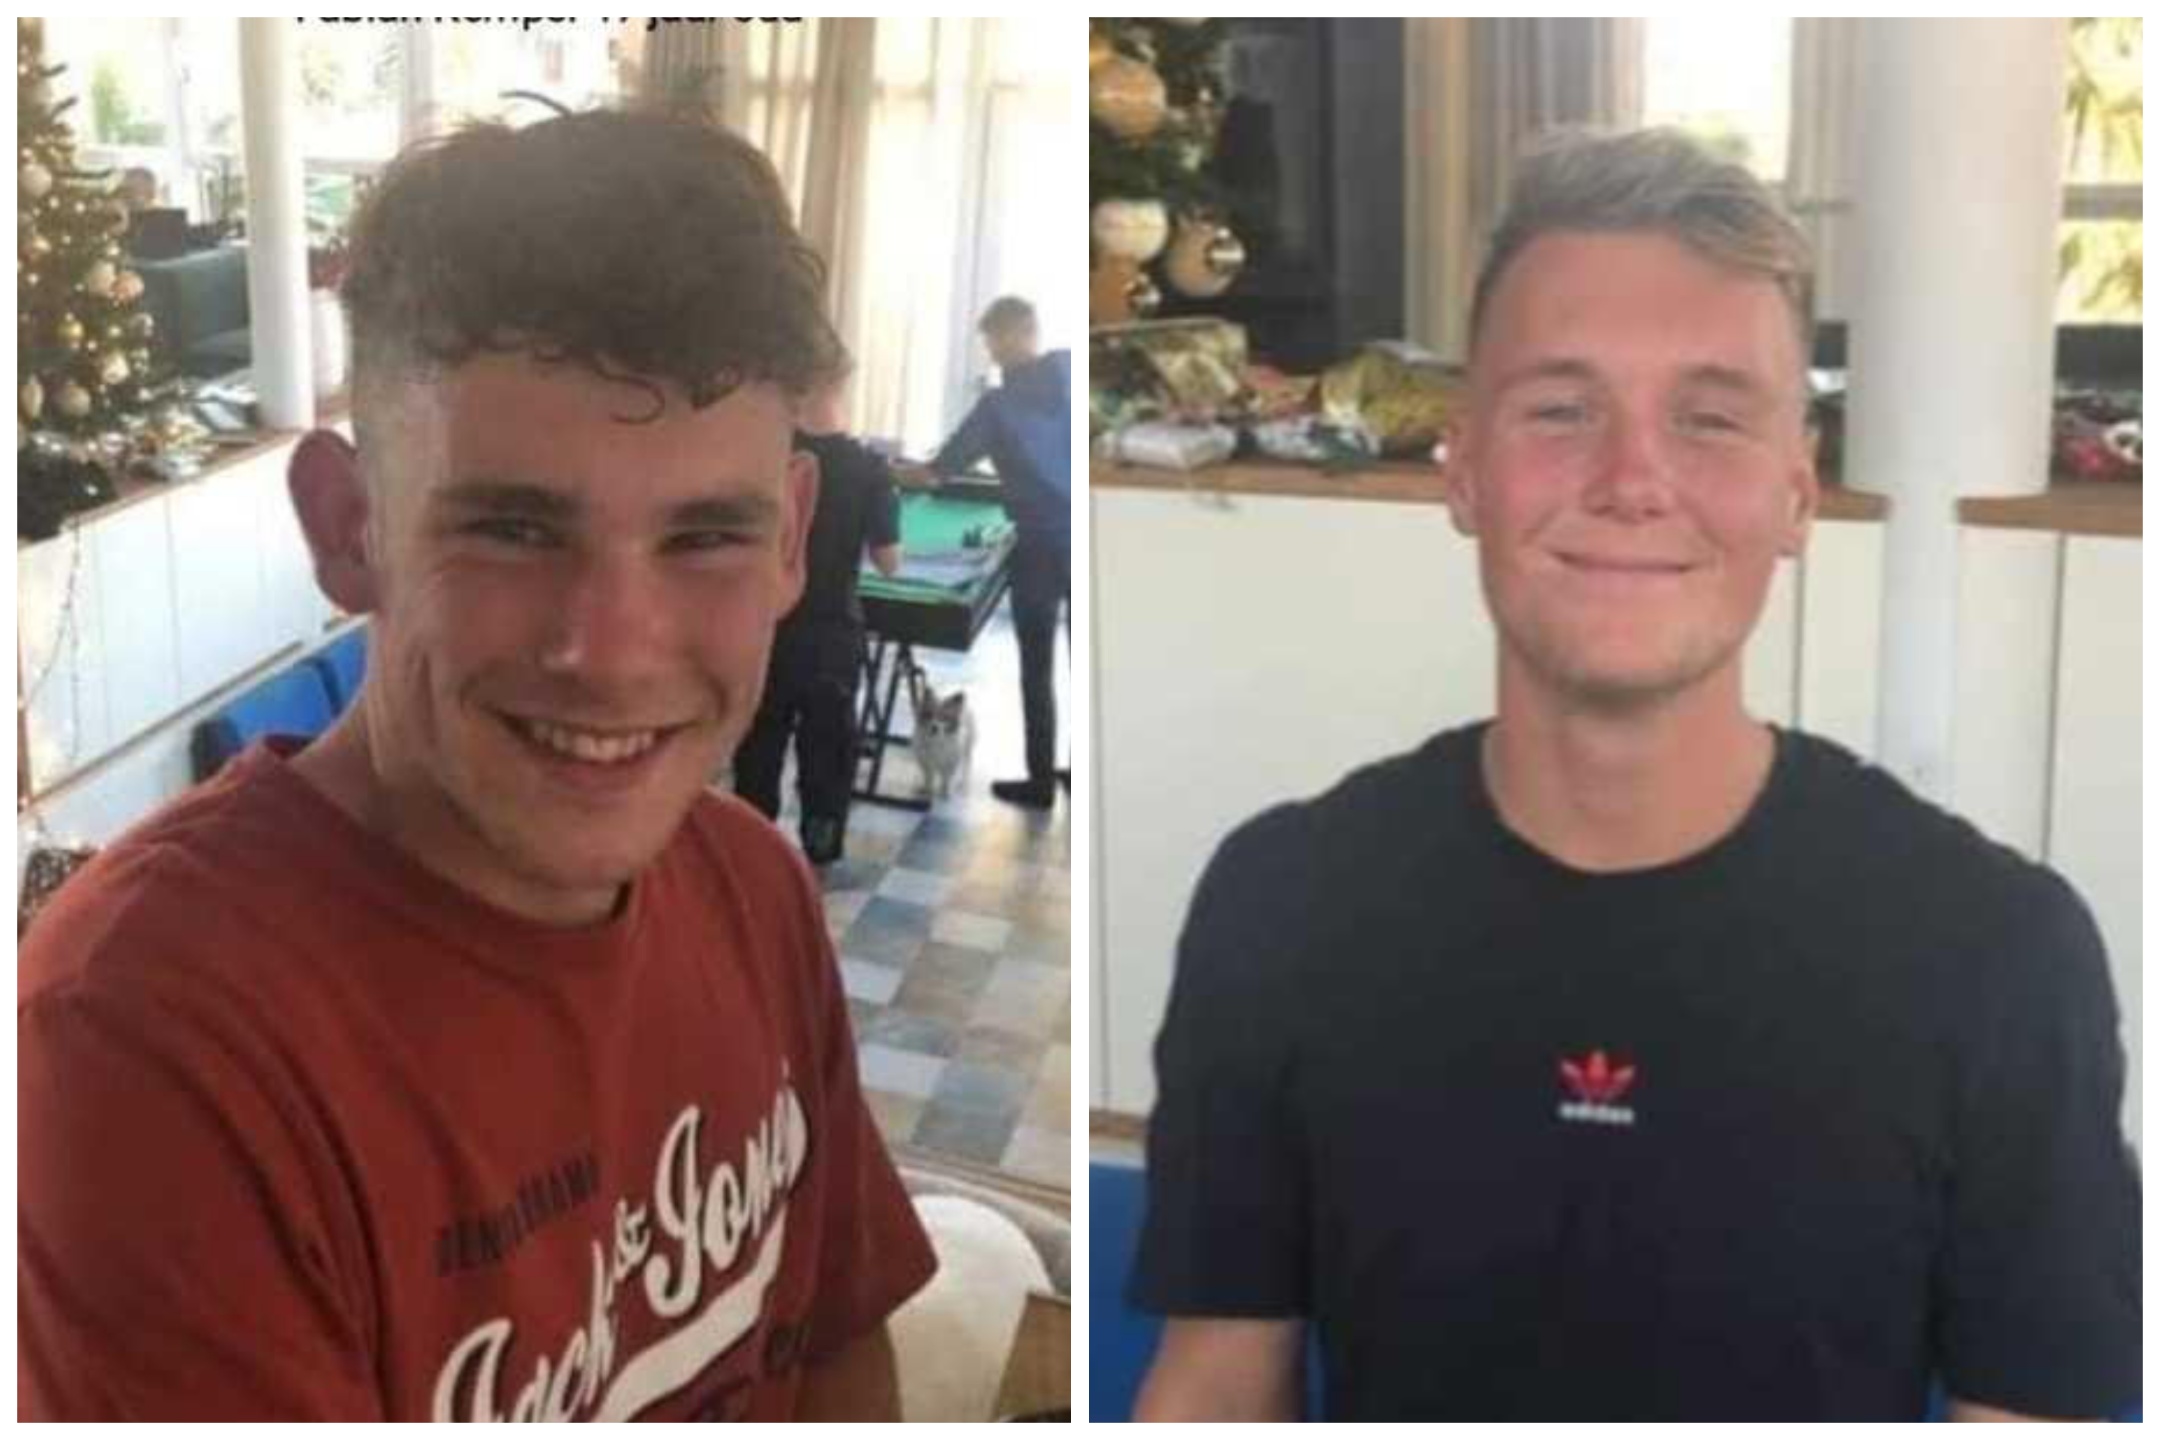 Urgent appeal for two missing expat teens who disappeared in Spain 10 days ago: Latest sighting places them in Benidorm